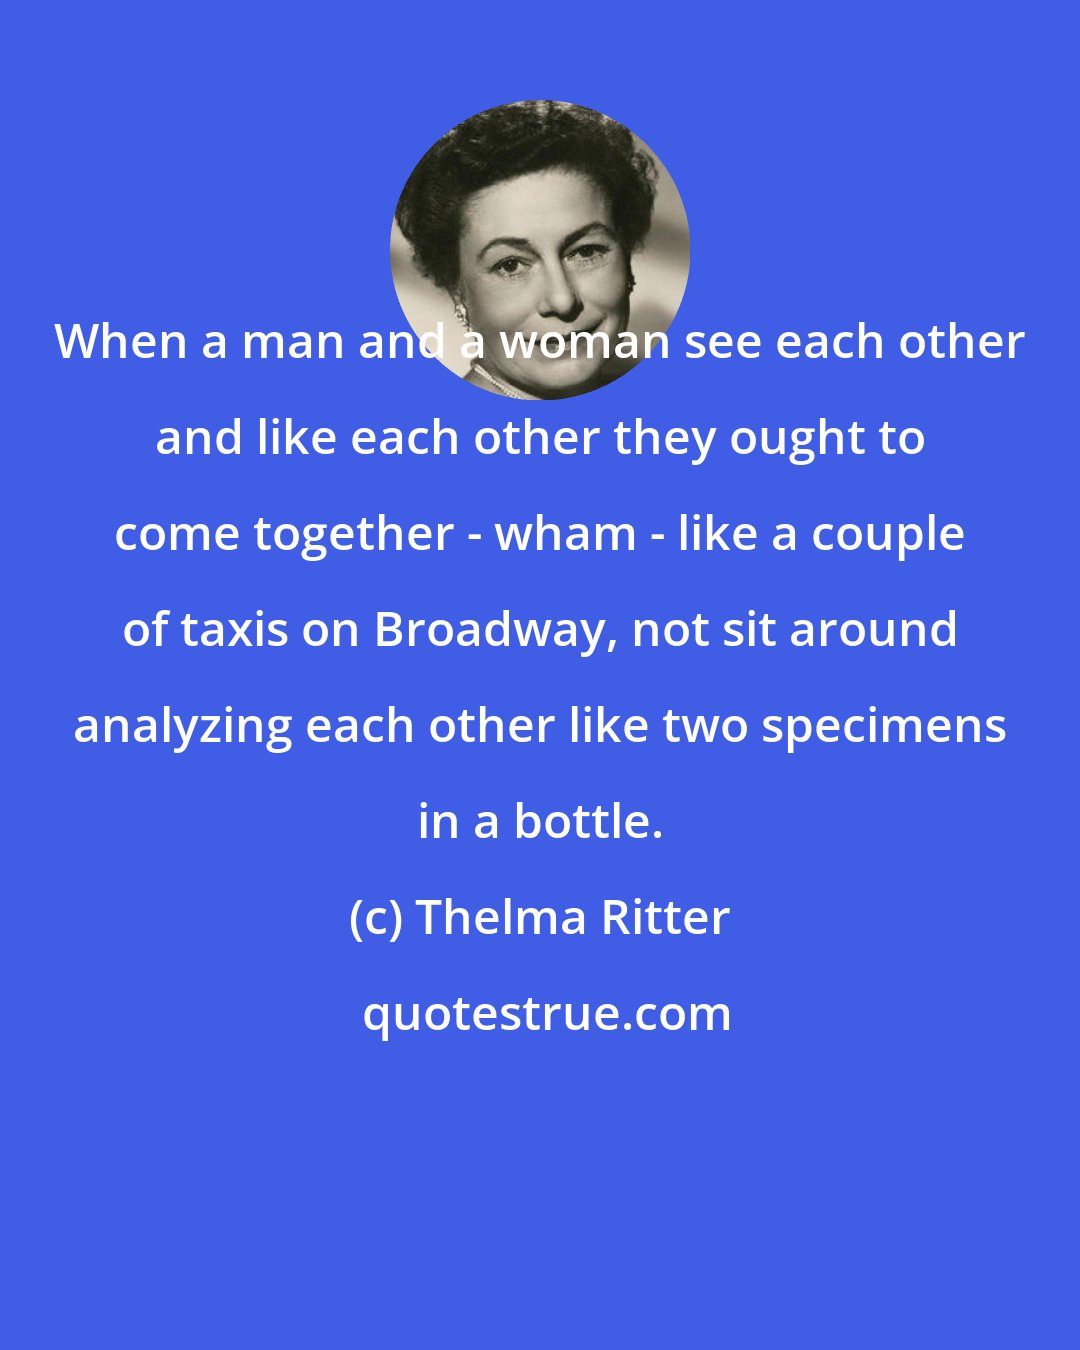 Thelma Ritter: When a man and a woman see each other and like each other they ought to come together - wham - like a couple of taxis on Broadway, not sit around analyzing each other like two specimens in a bottle.